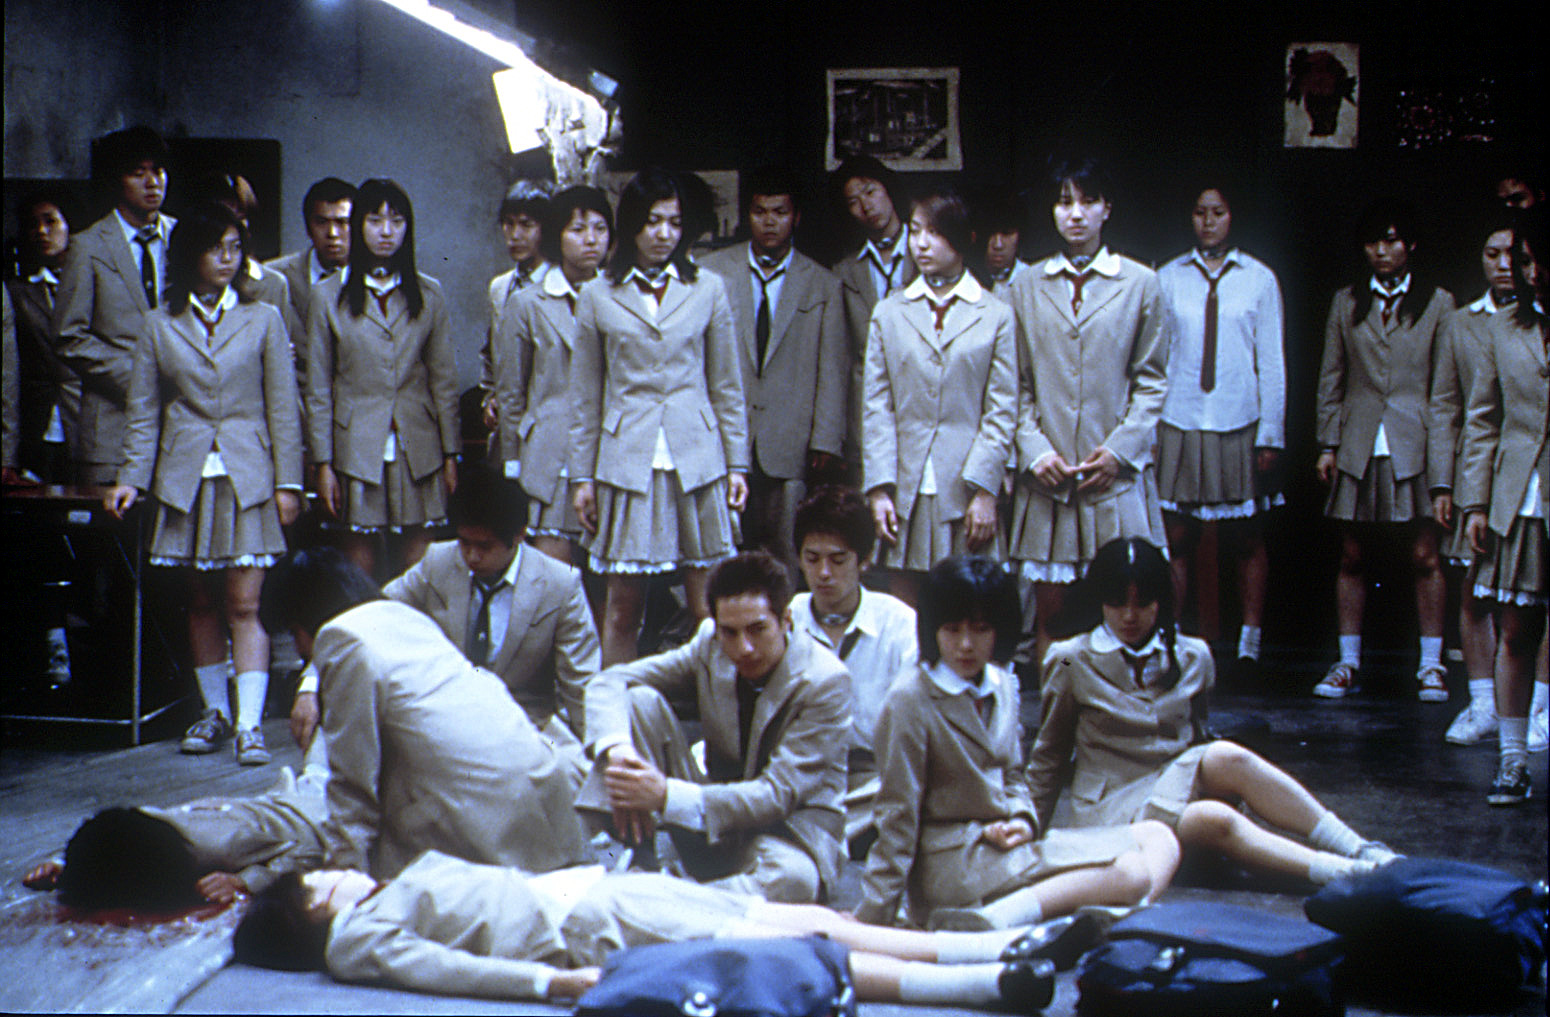 Battle Royale contestants standing in a classroom, about to embark on a battle to the death.